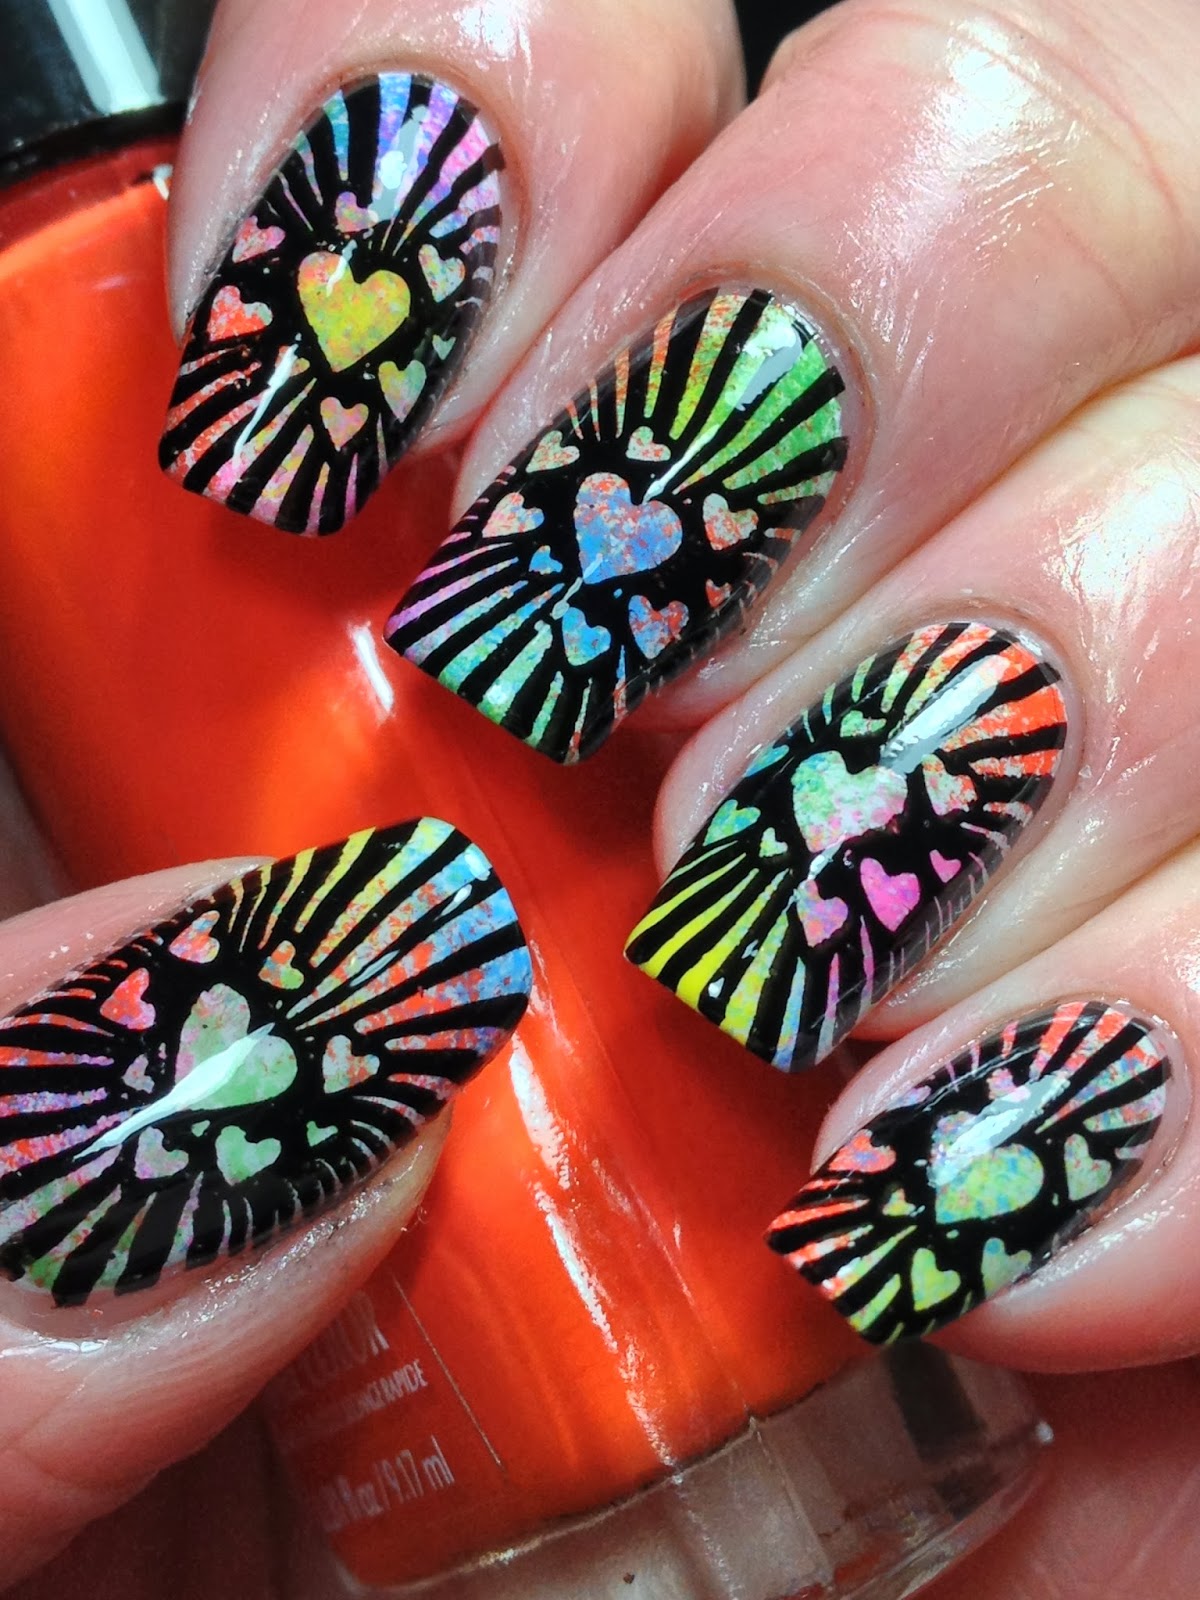 Canadian Nail Fanatic: Funky Valentine's Day Nails